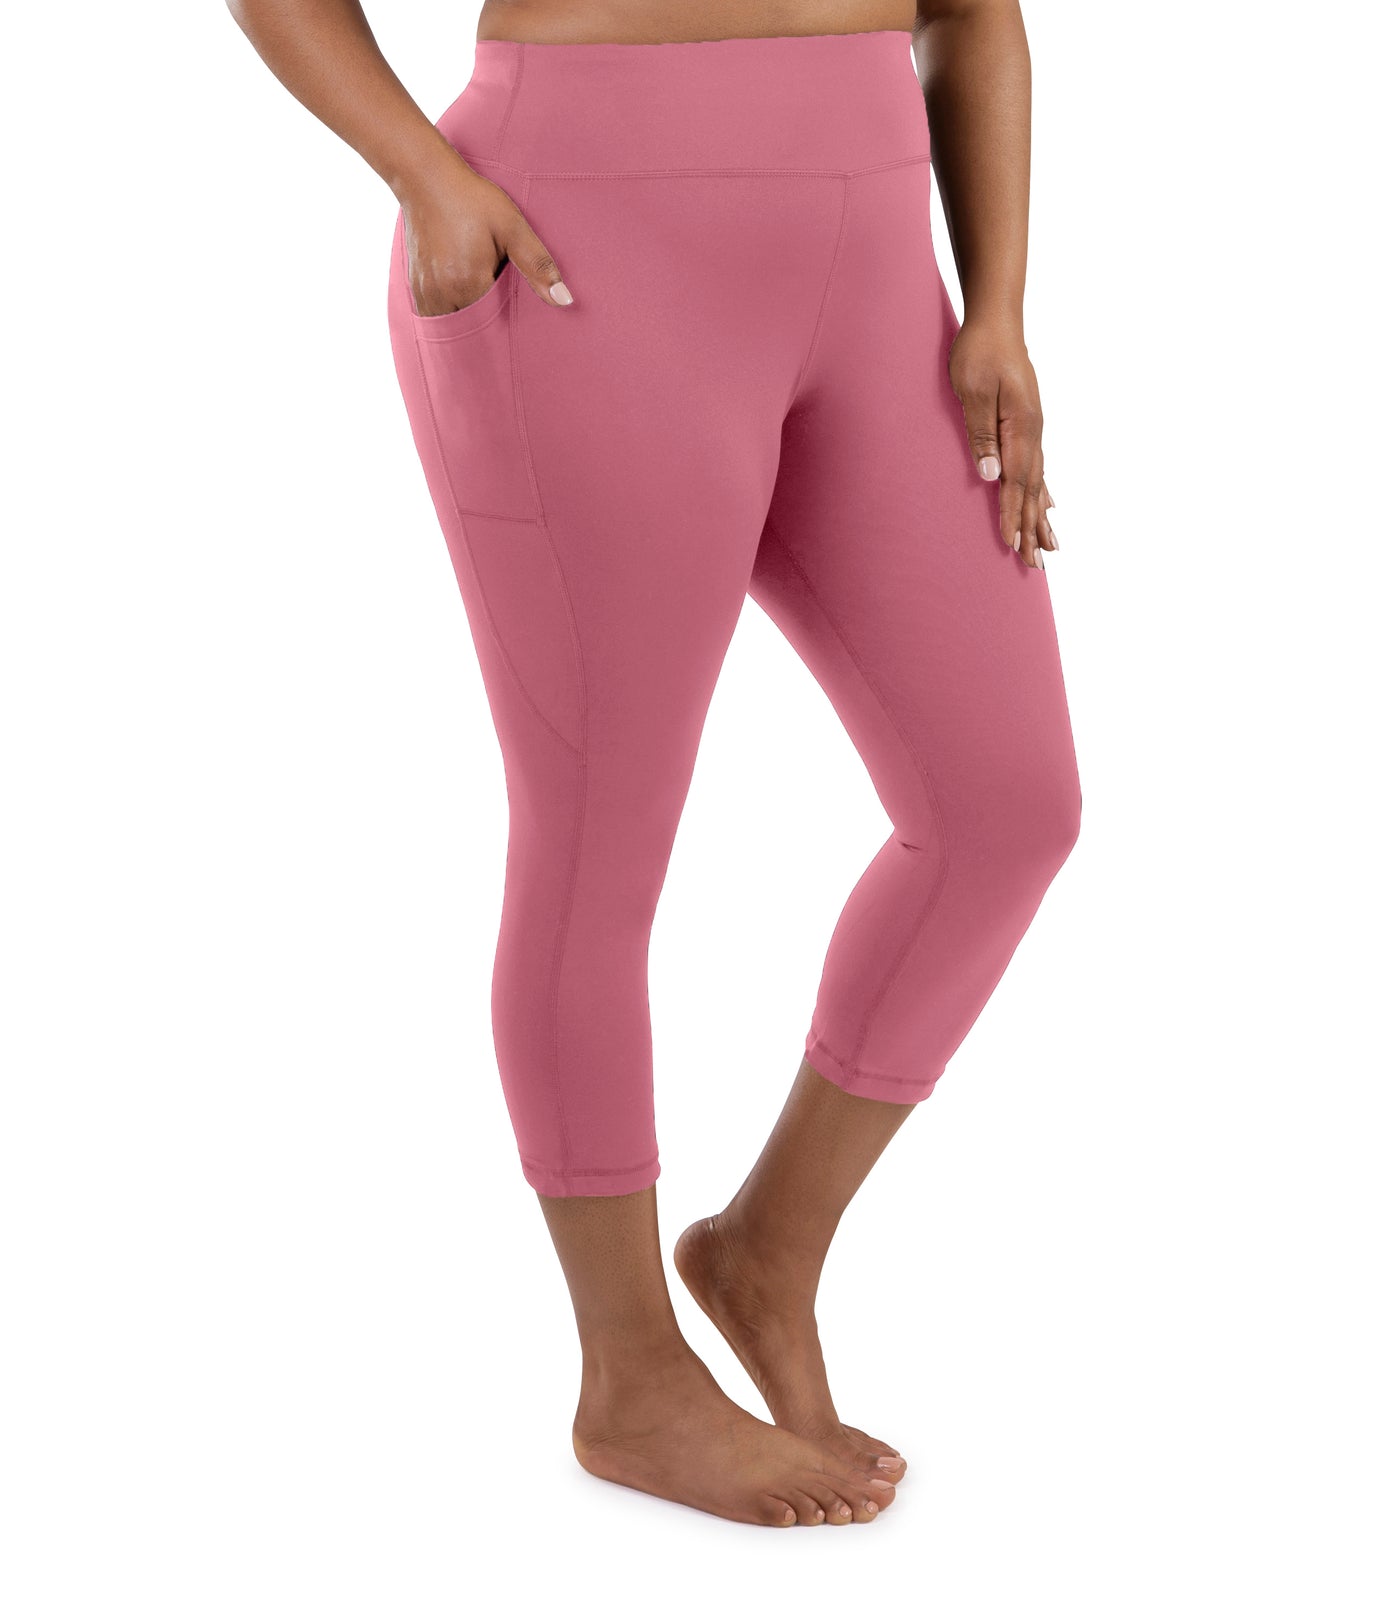 Bottom half of plus sized woman, facing front, wearing JunoActive JunoStretch Side Pocket Capris in warm mauve. The hem falls a few inches above ankle and have pockets on both sides.